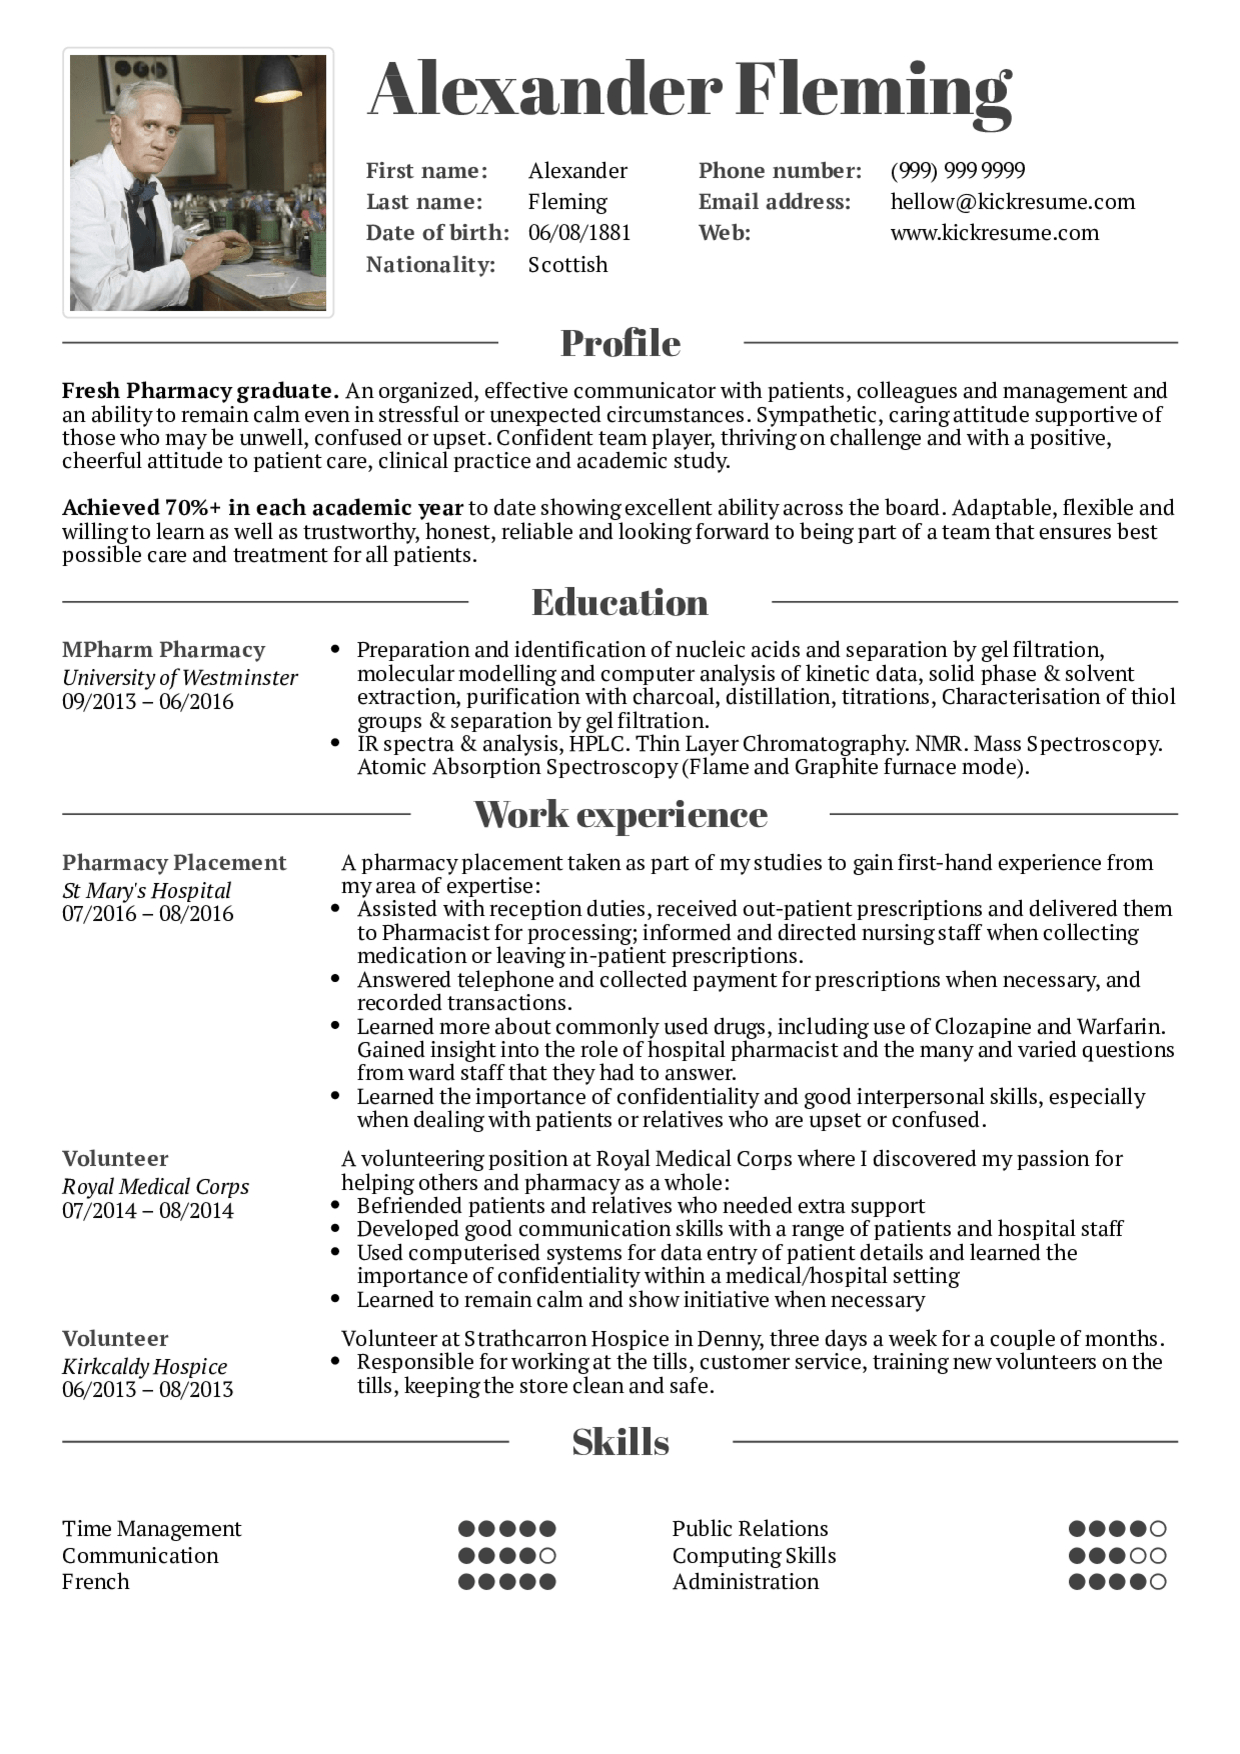 Resume Examples Real People Student Resume Pharmacy inside proportions 1240 X 1754